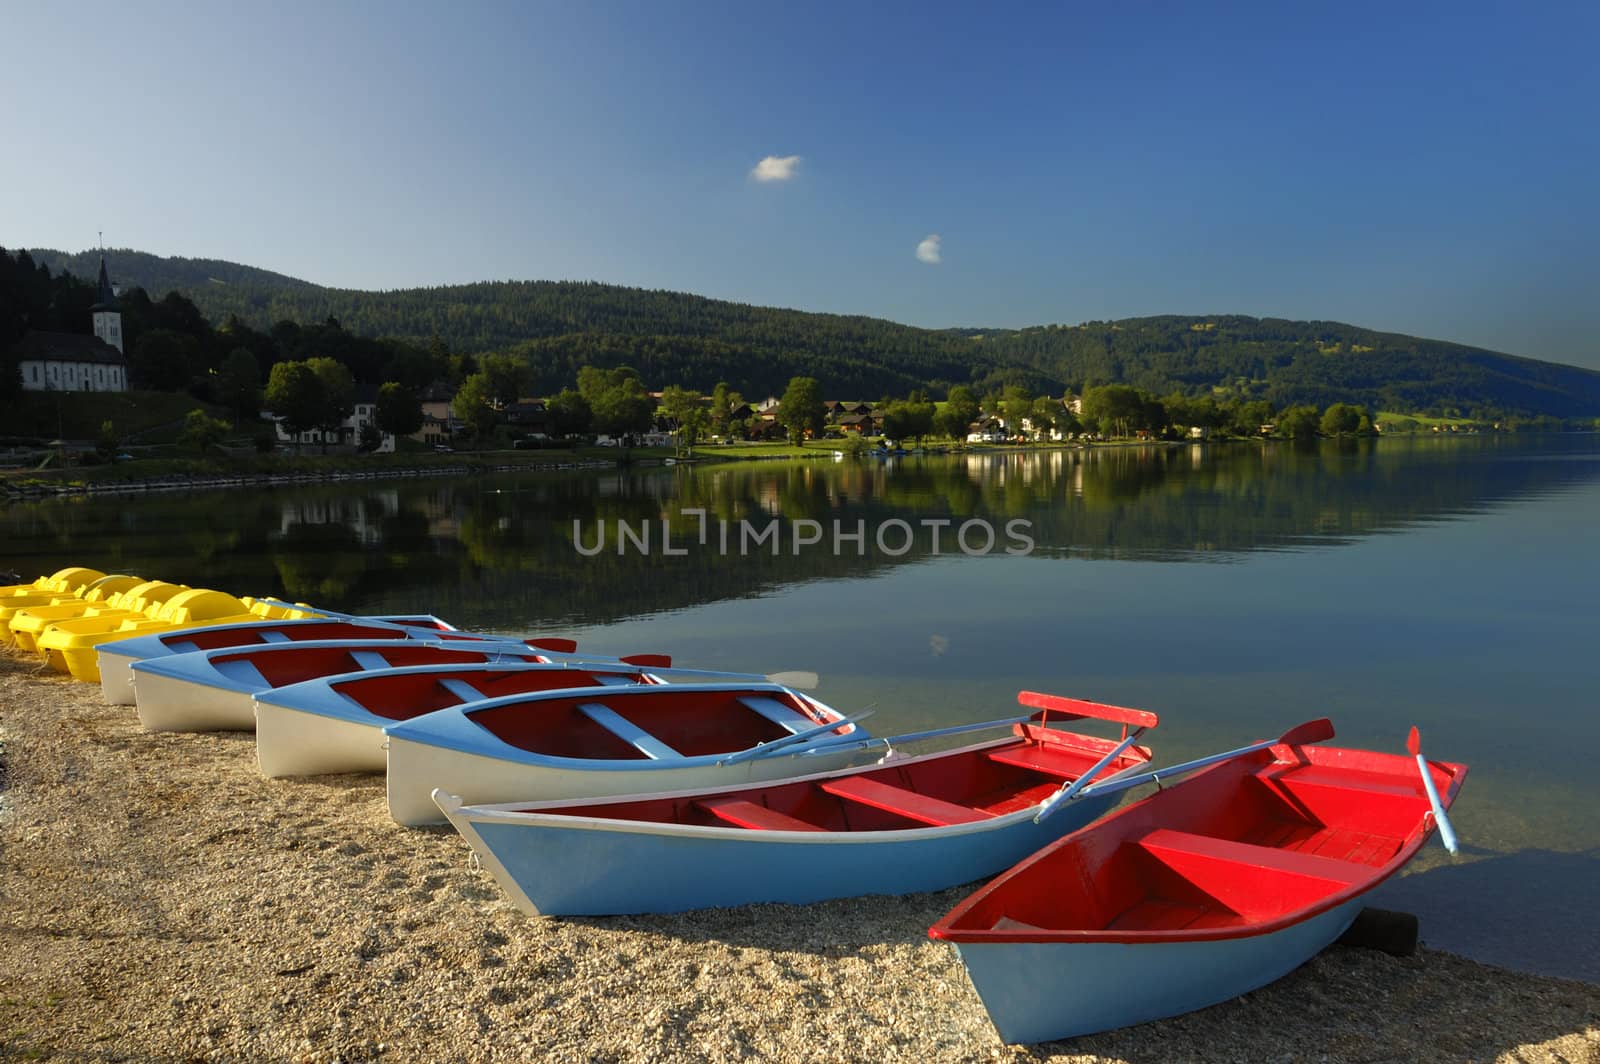 Very early in the morning, one summer's day, on the shore of the Lac de Joux, Switzerland